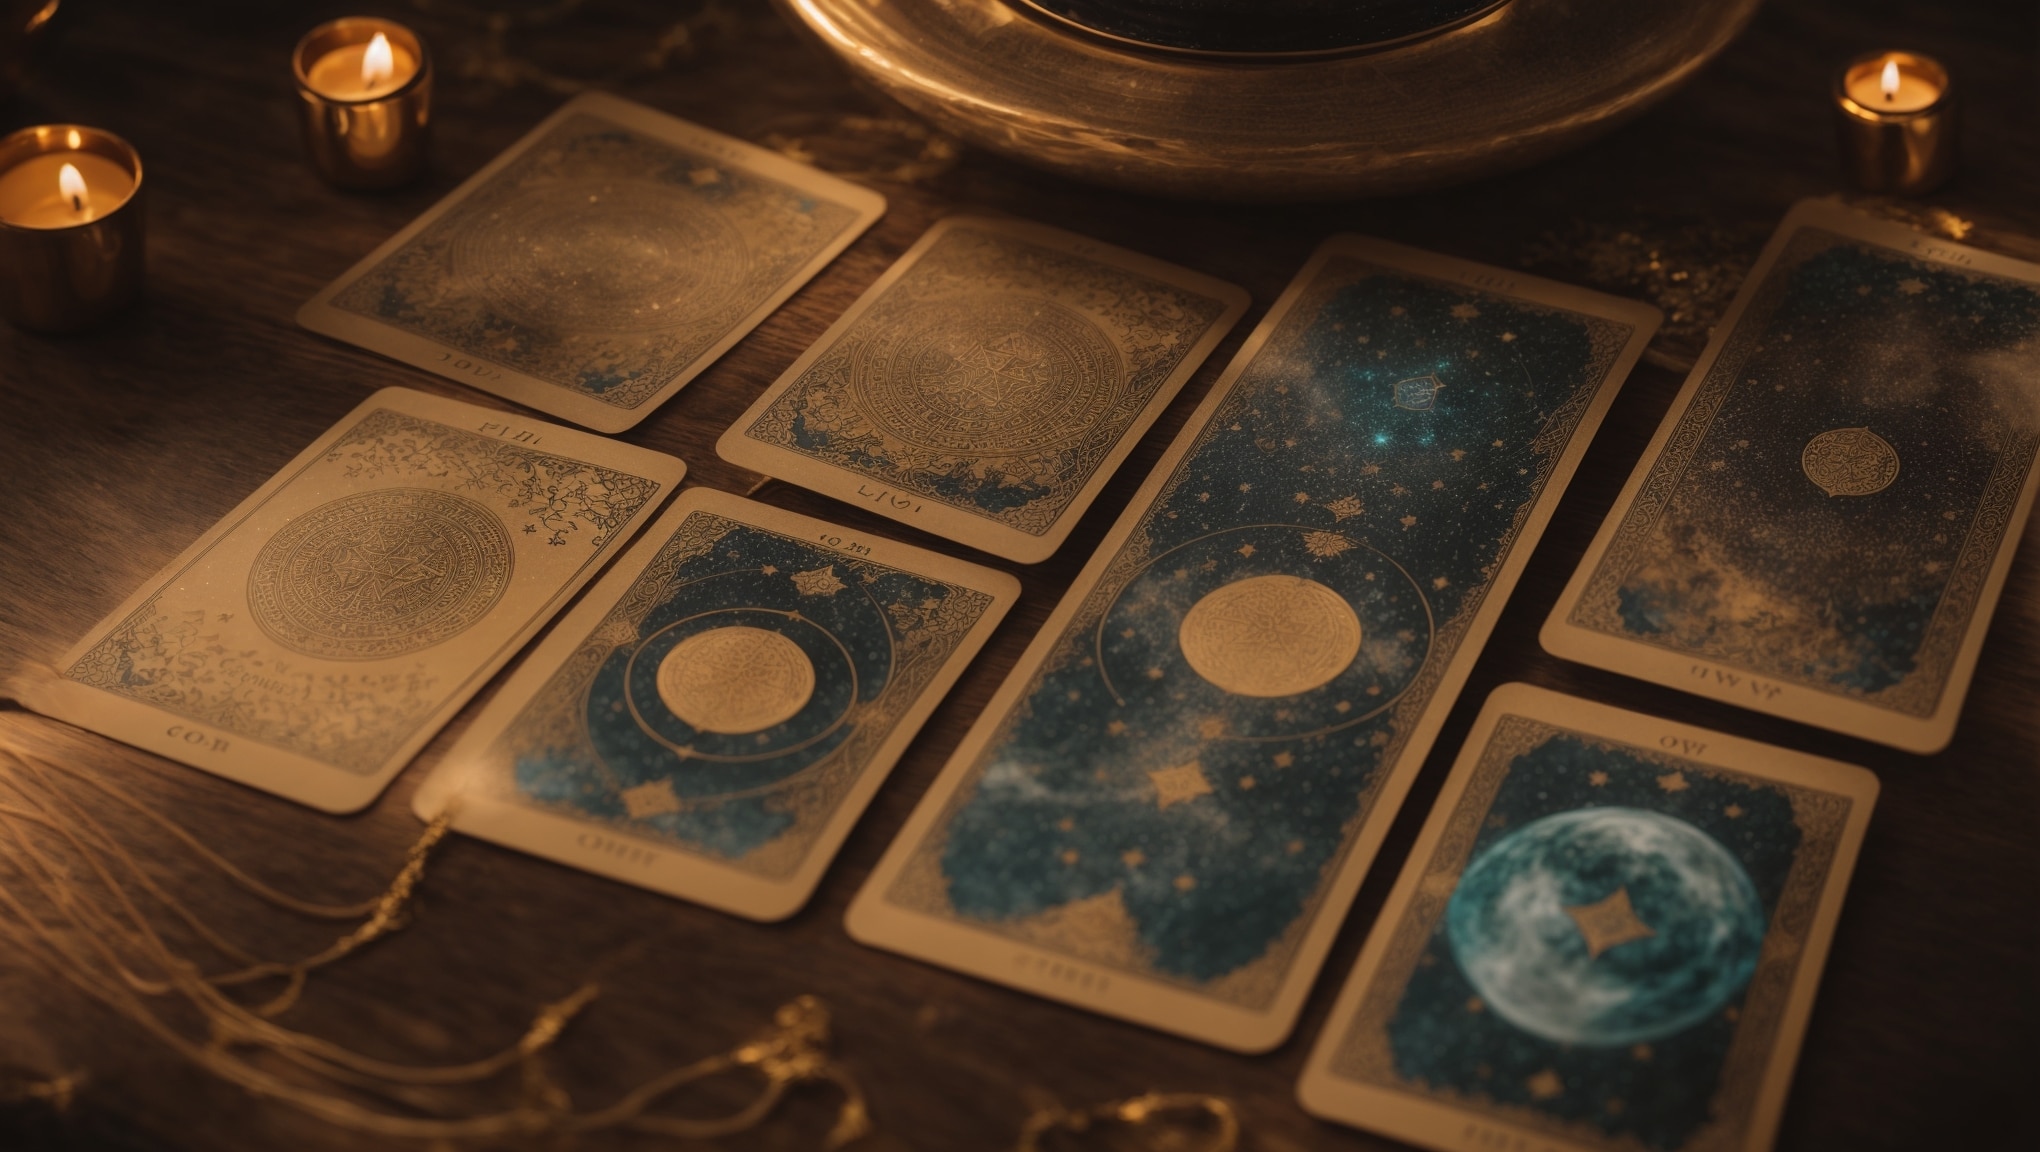 Eleven tarot cards with unique meanings and correspondences are surrounded by symbols like stars and zodiac signs on a mystical background with a soft glow.